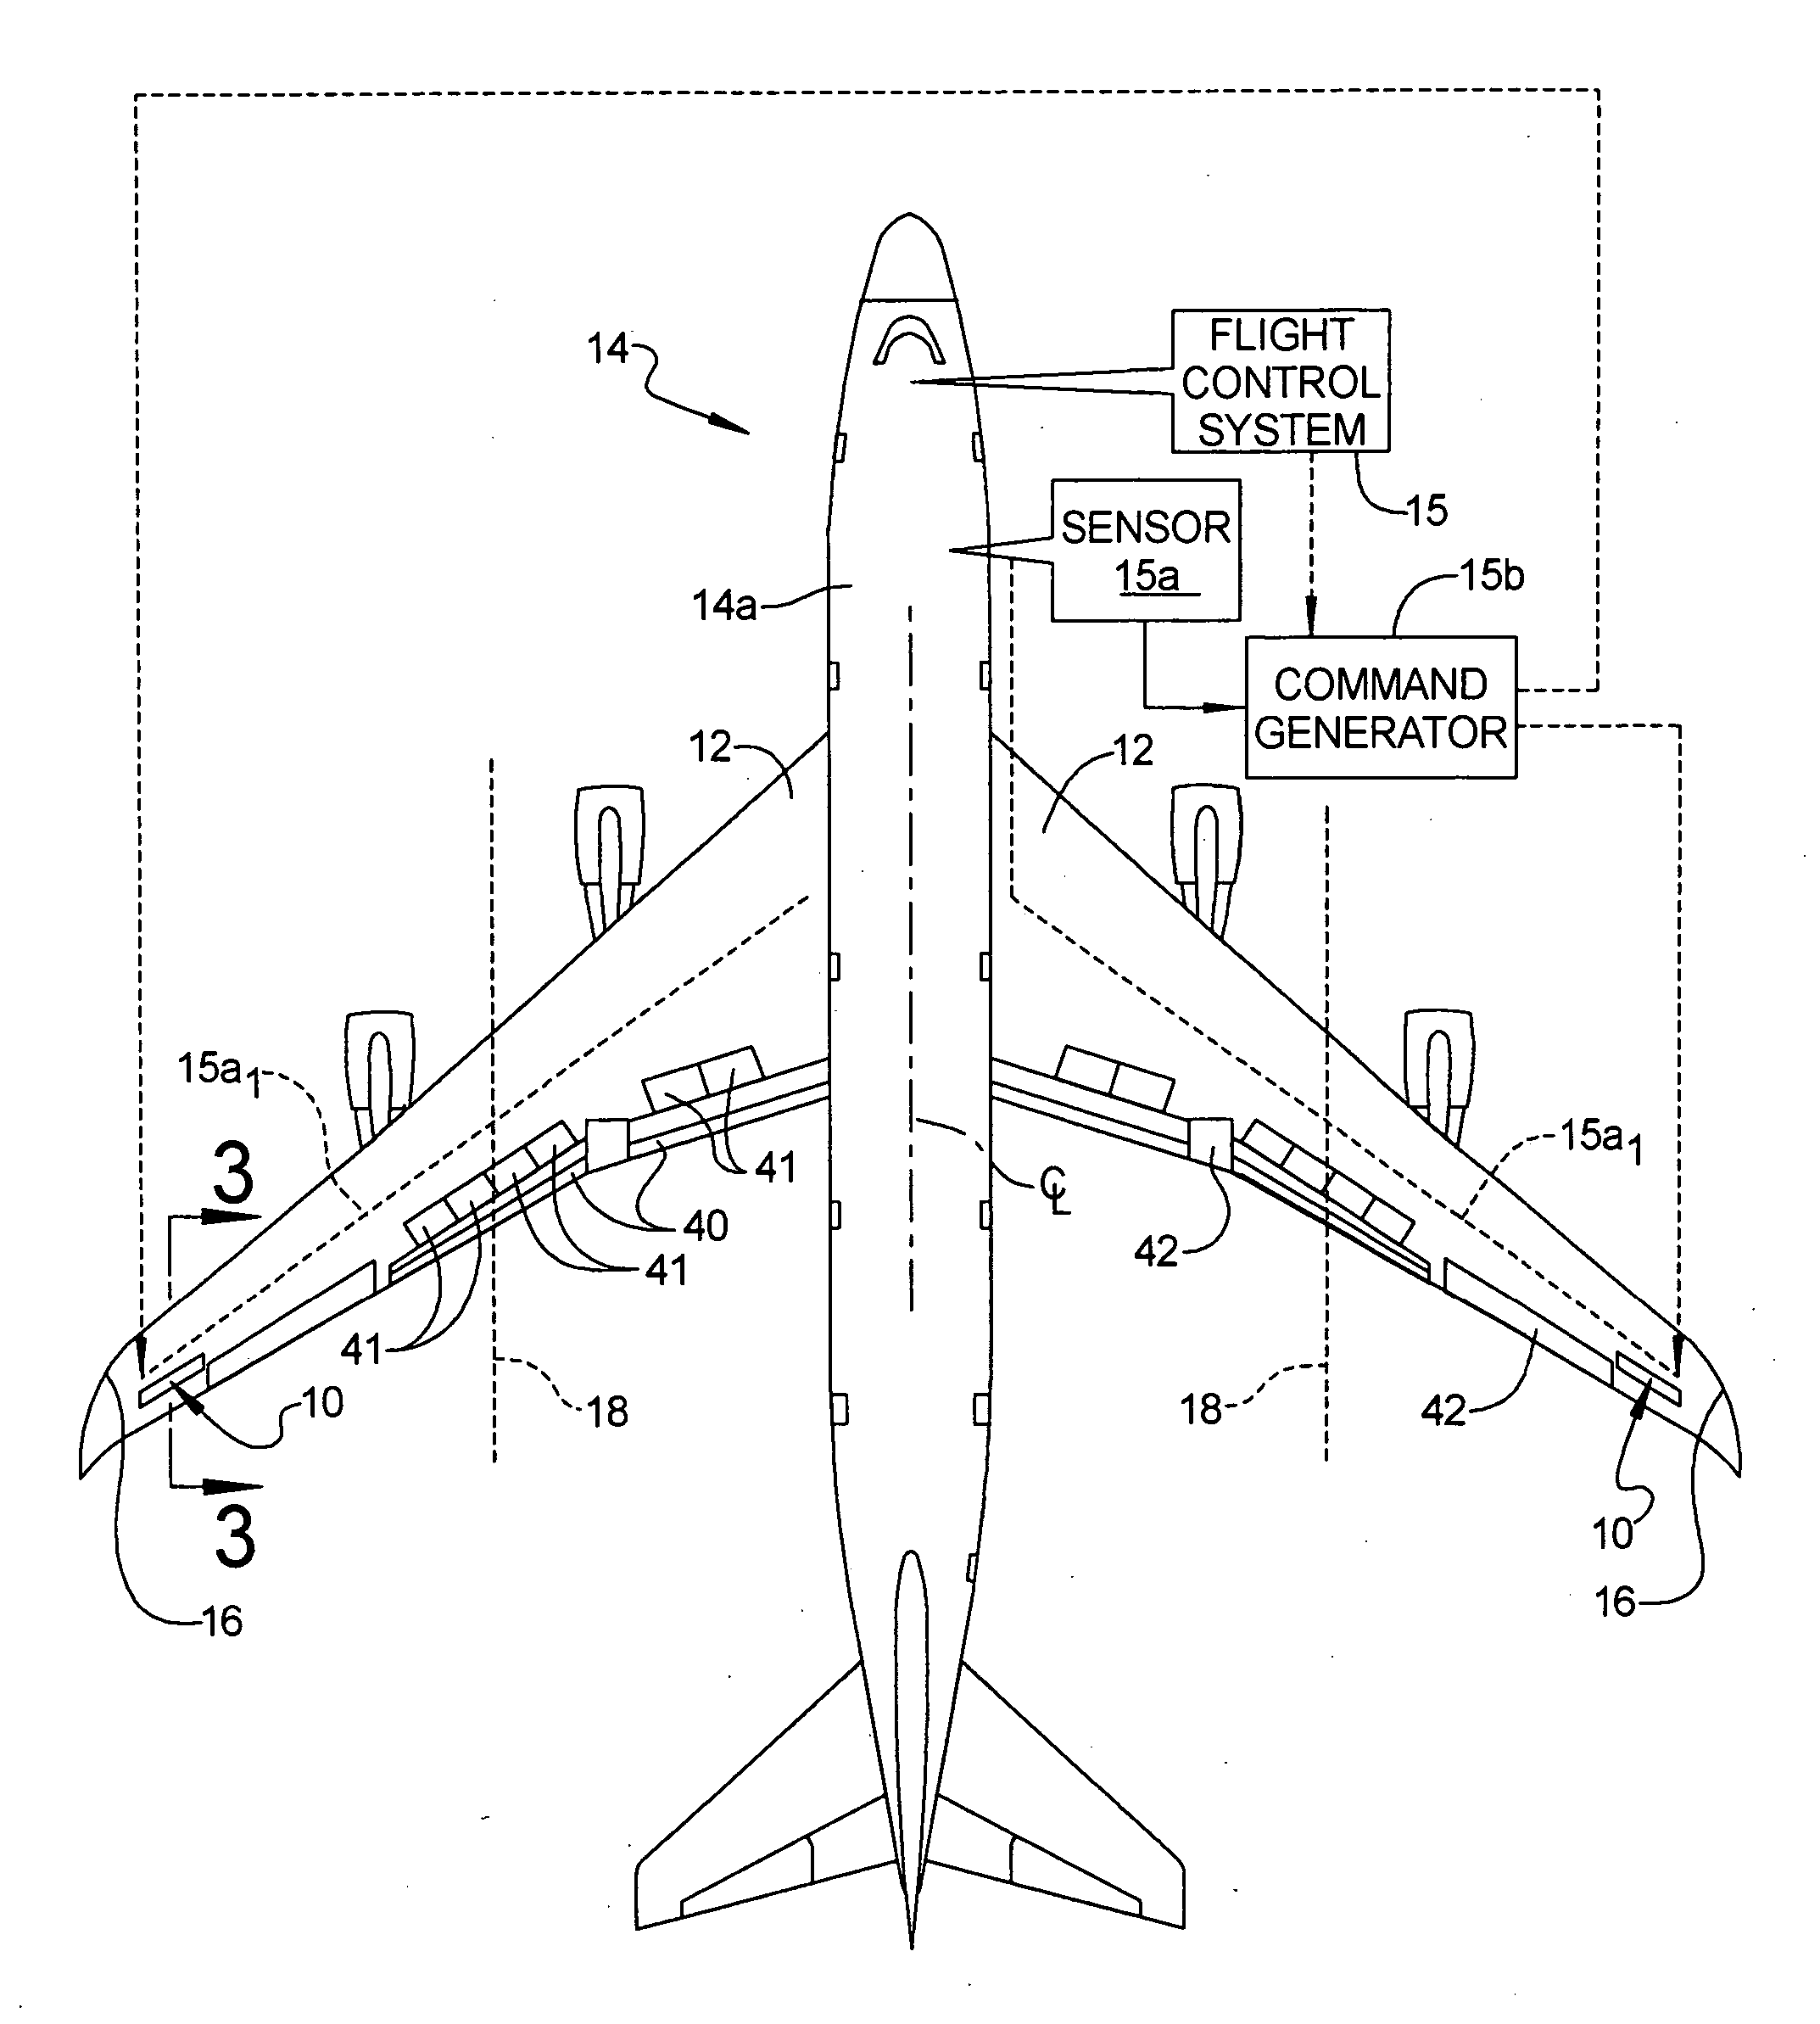 Wing load alleviation apparatus and method